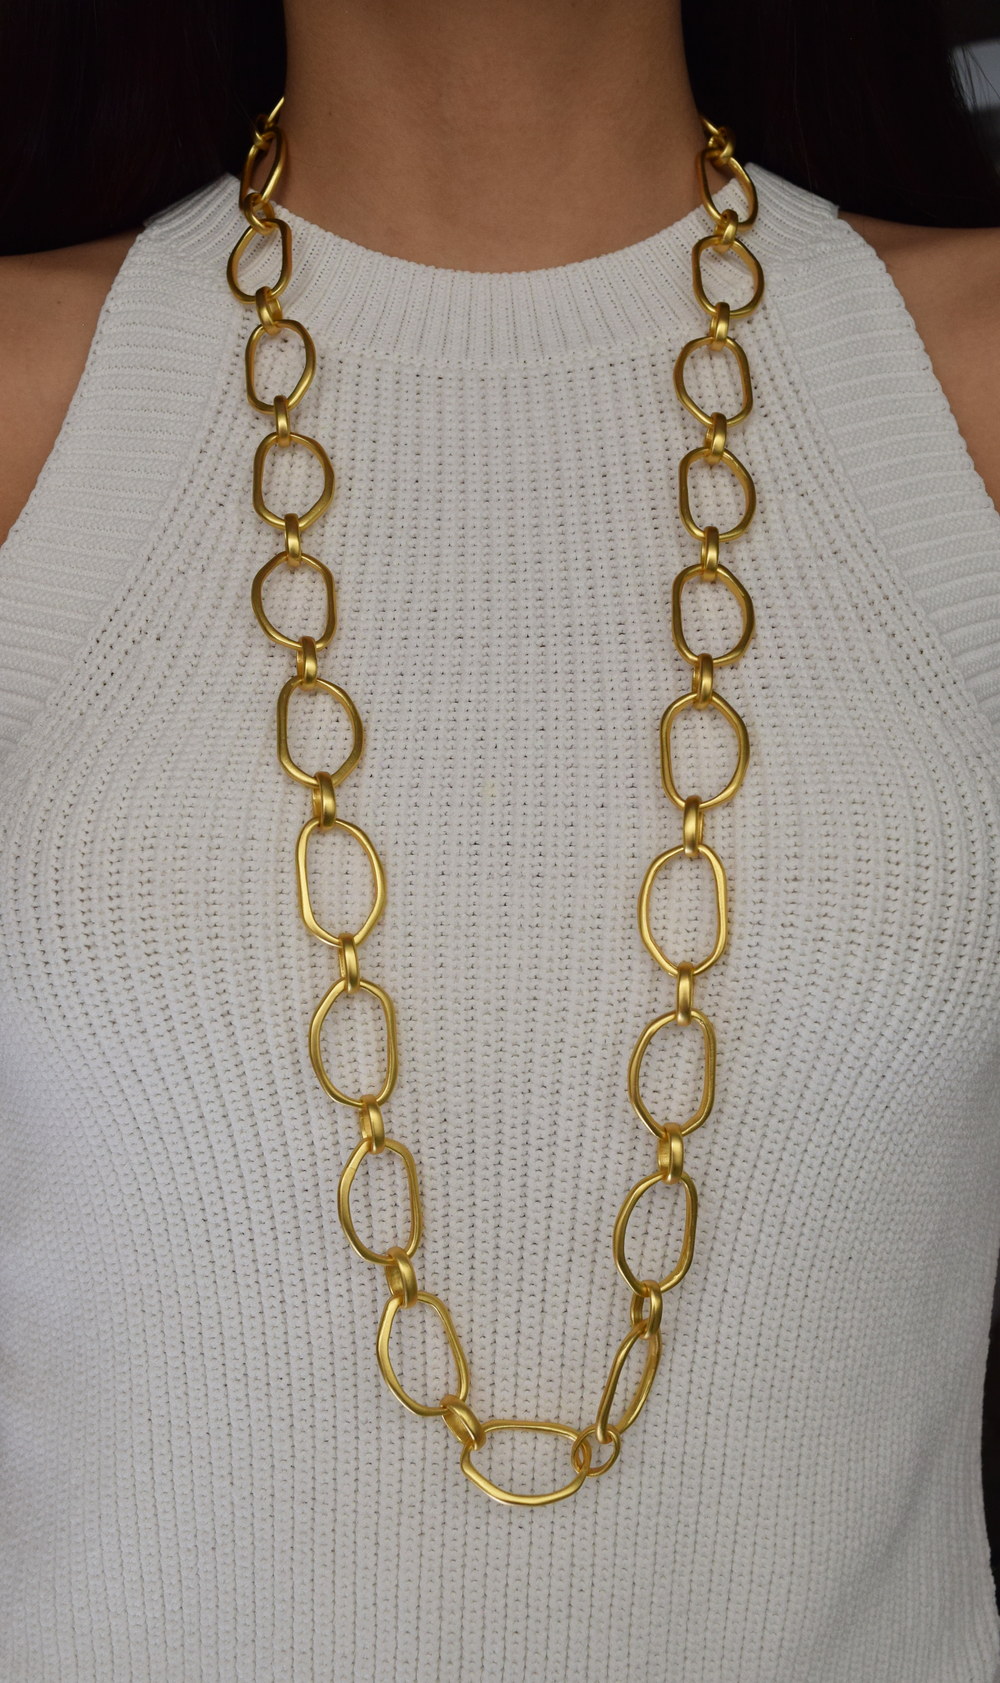 EFTOM Layered Necklaces for Women Gold Layered Chunky Chain